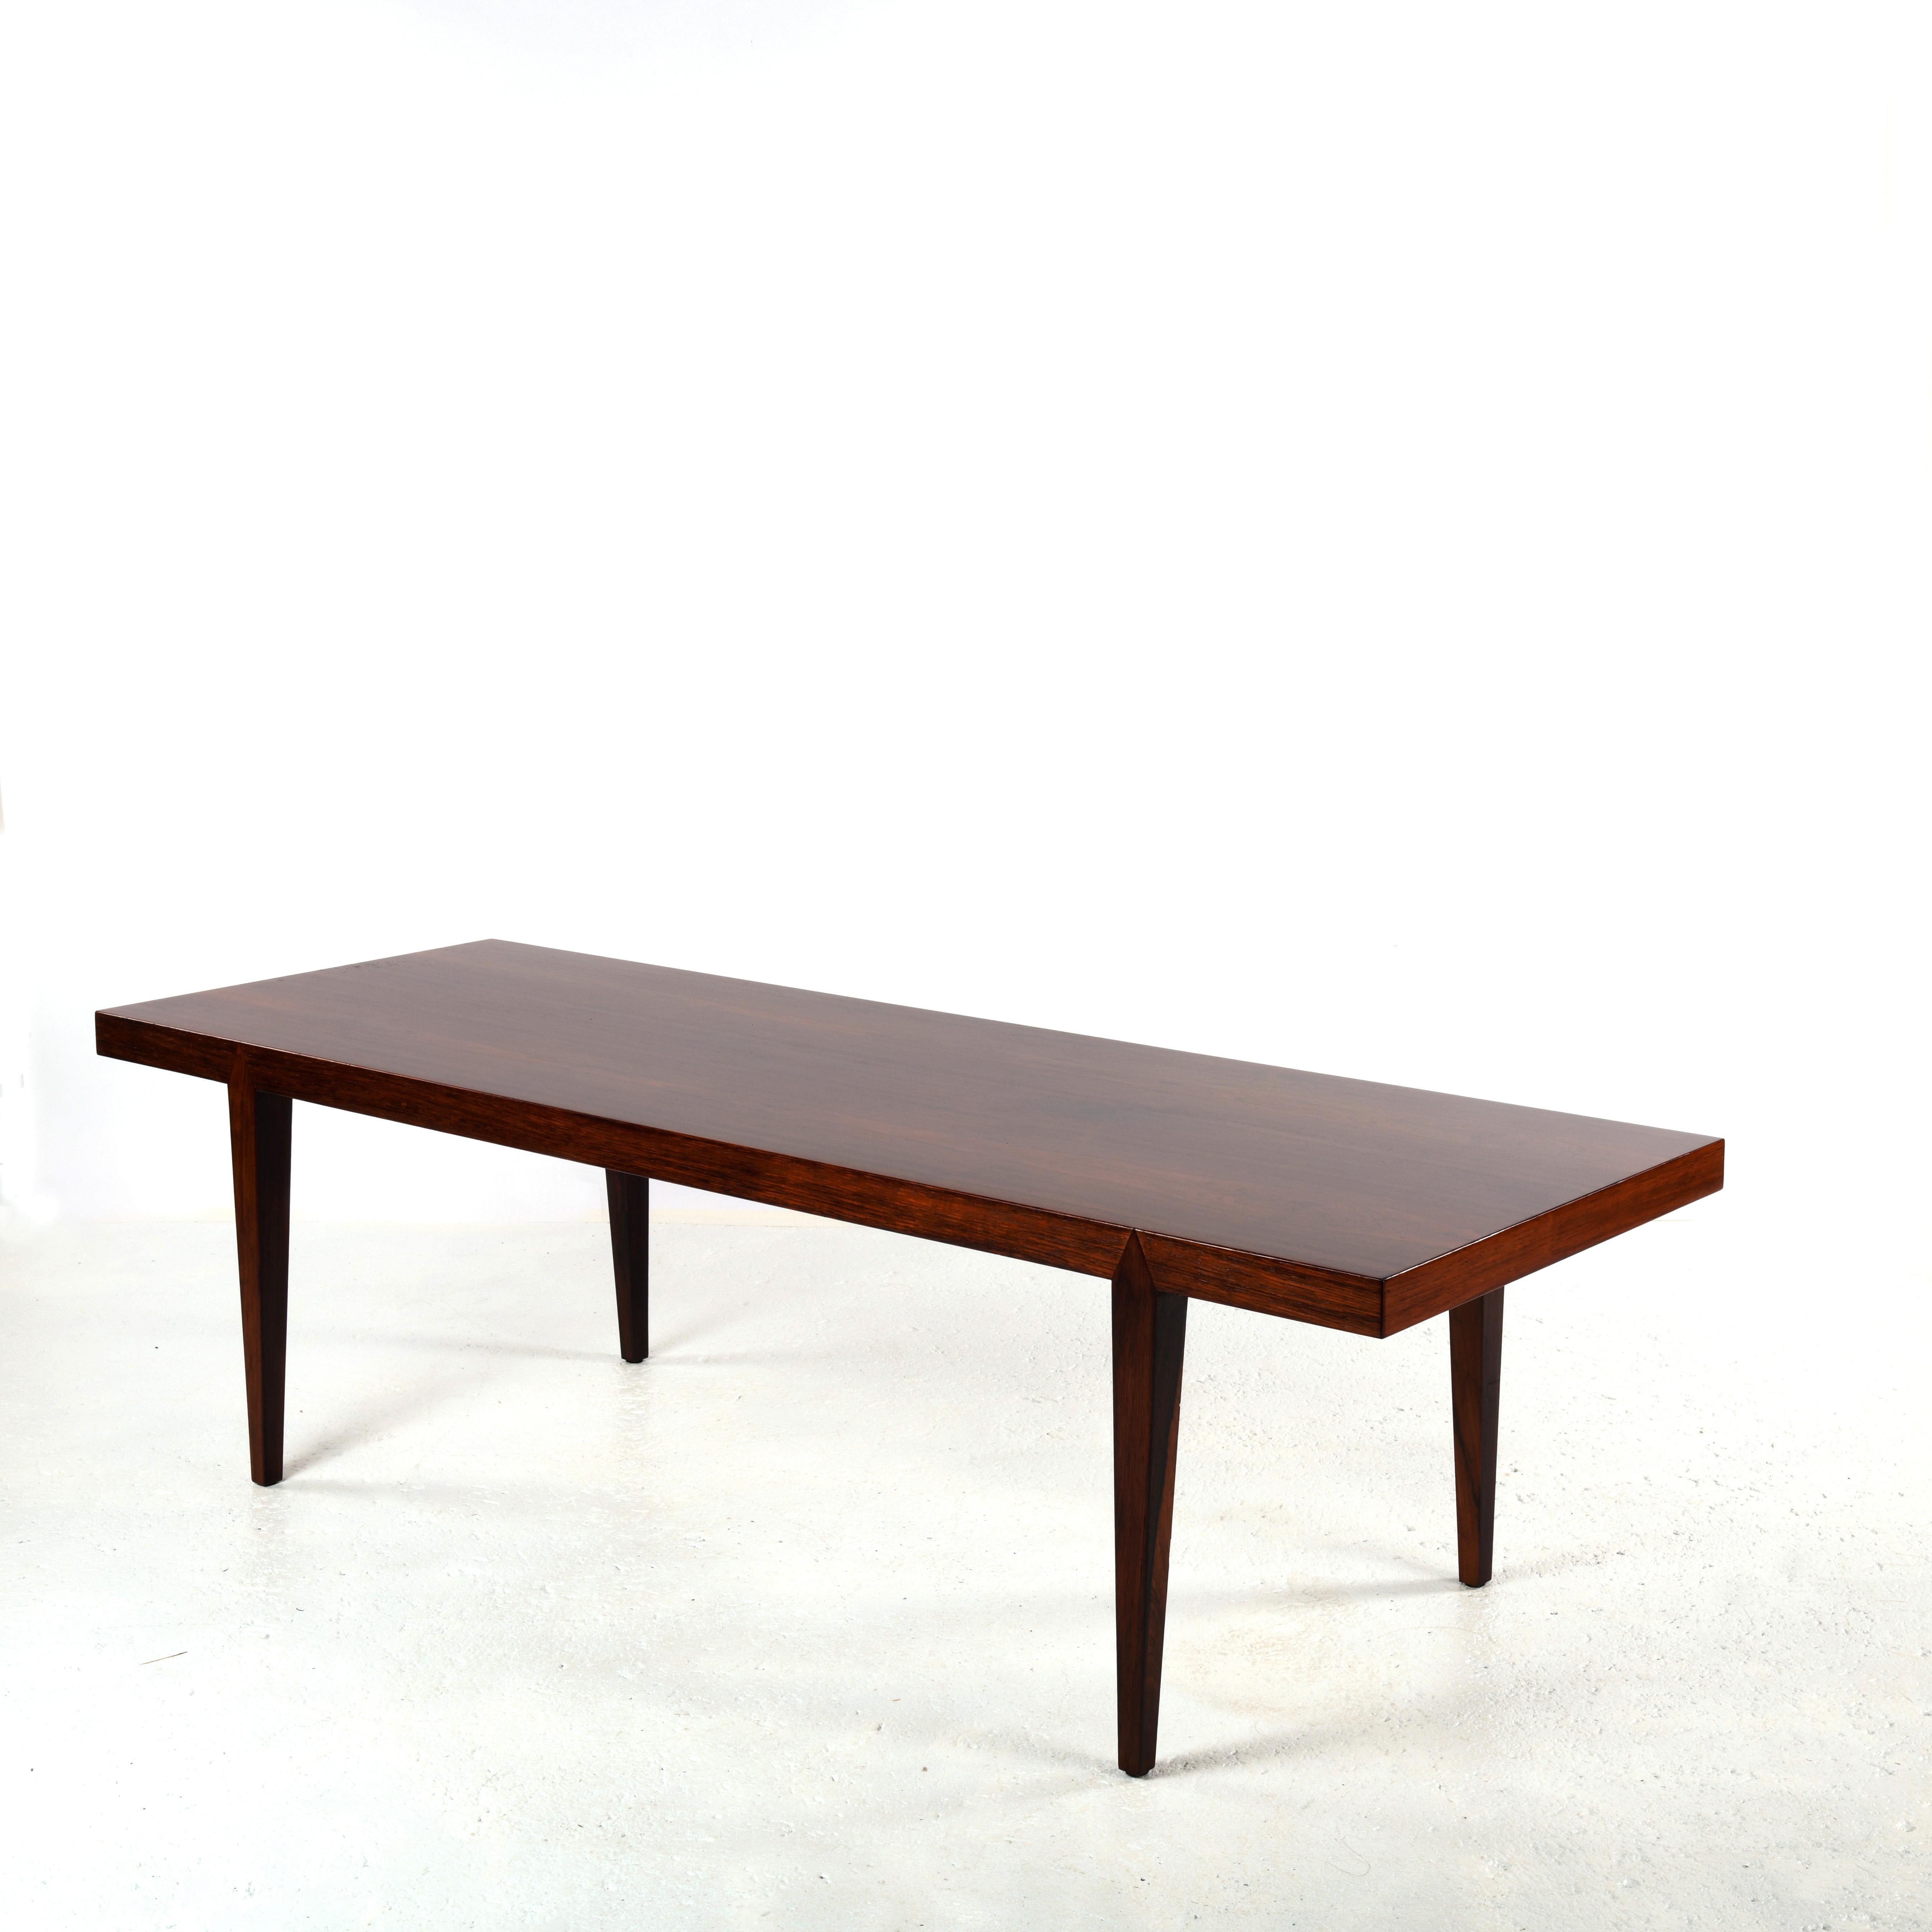 Large coffee table designed by Severin Hansen (1903-1979) in the 1960s, published by Haslev Møbelfabrik in Denmark. The top and fields are protected by a satin-finish varnish, which means they can be used regularly, glasses, bottles or food can be